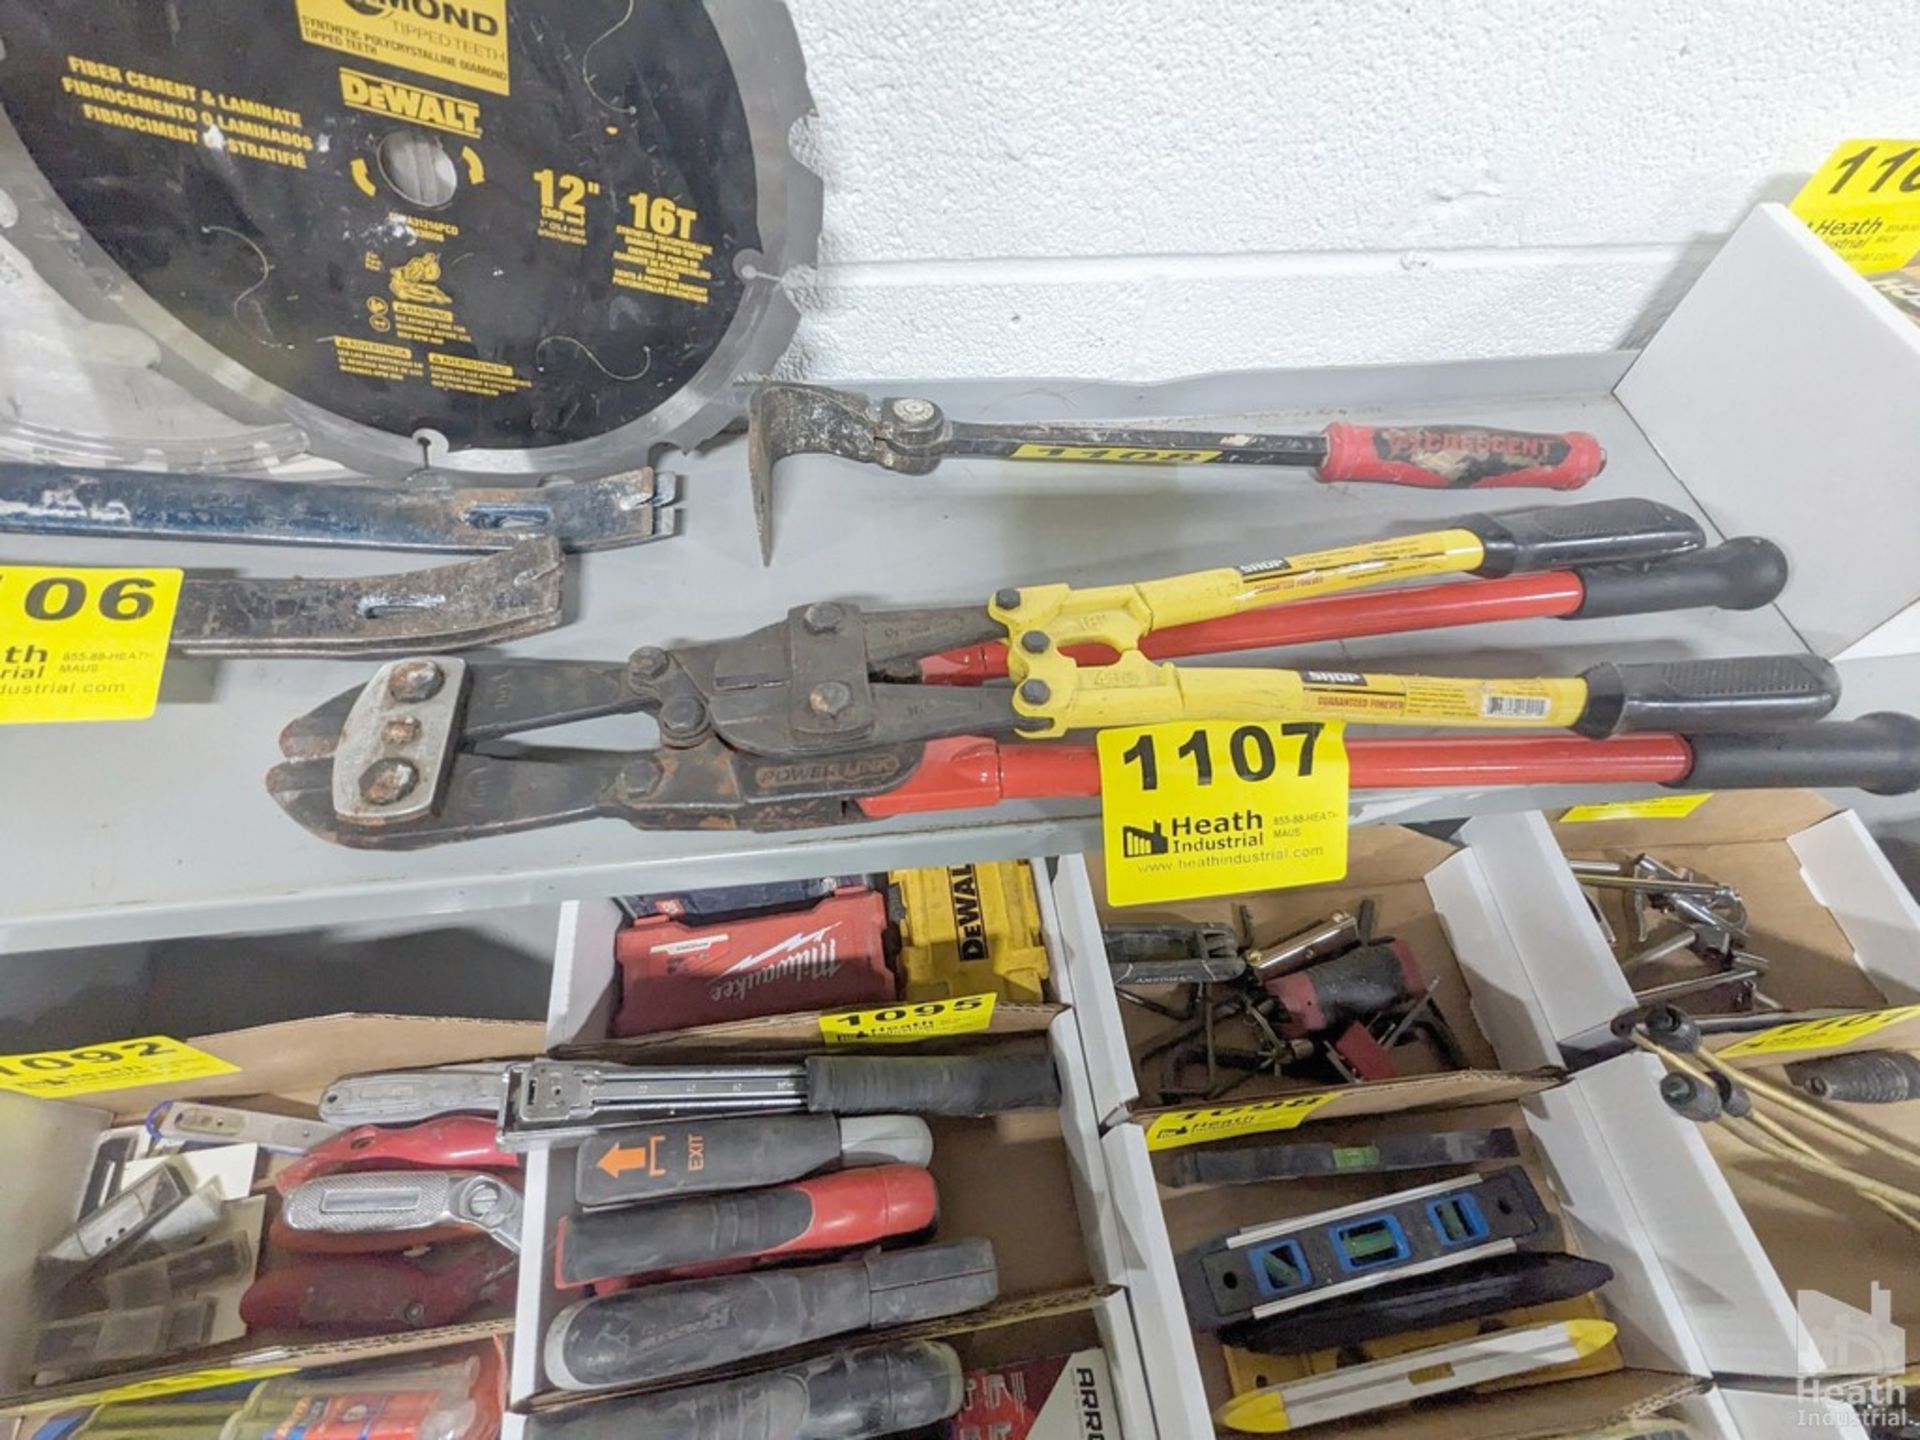 (2) CRIMPERS/BOLT CUTTERS, 16" TOOLSHOP AND 24" POWERLINK